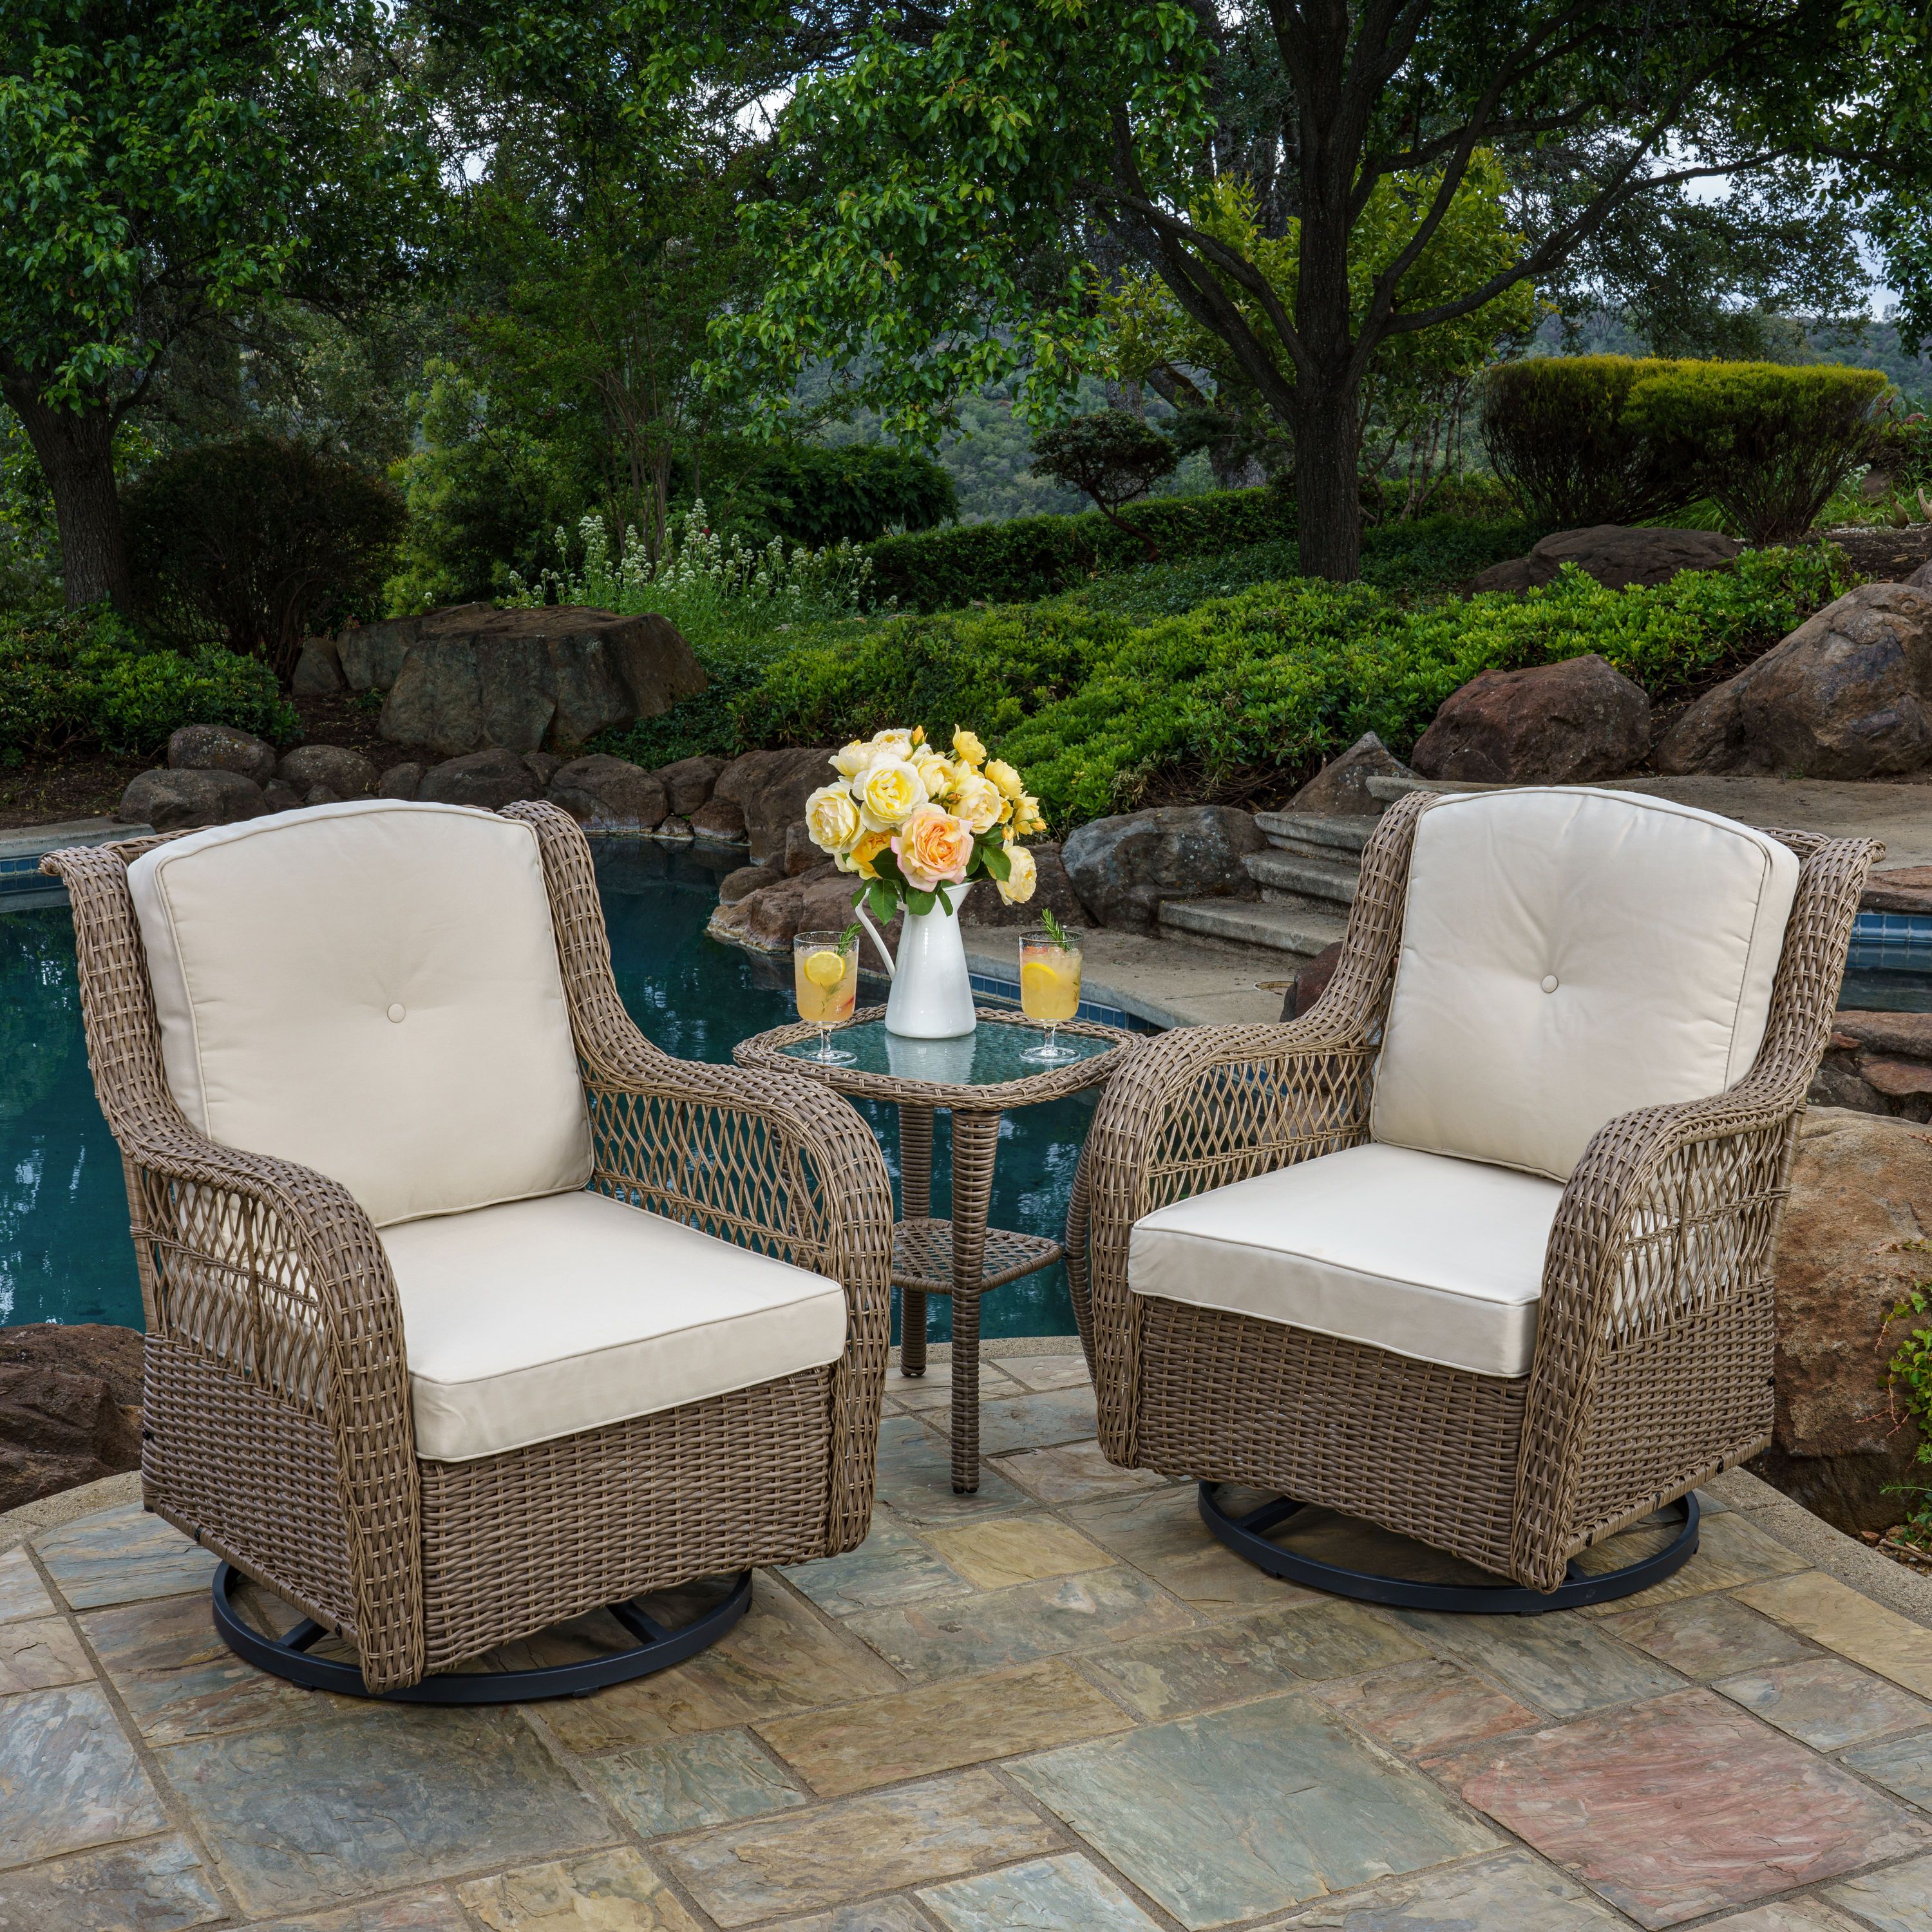 Tortuga Outdoor Rio Vista 3 Piece Wicker Patio Conversation Set With Tan  Cushions In The Patio Conversation Sets Department At Lowes With Regard To 3 Pieces Outdoor Patio Swivel Rocker Set (View 9 of 15)